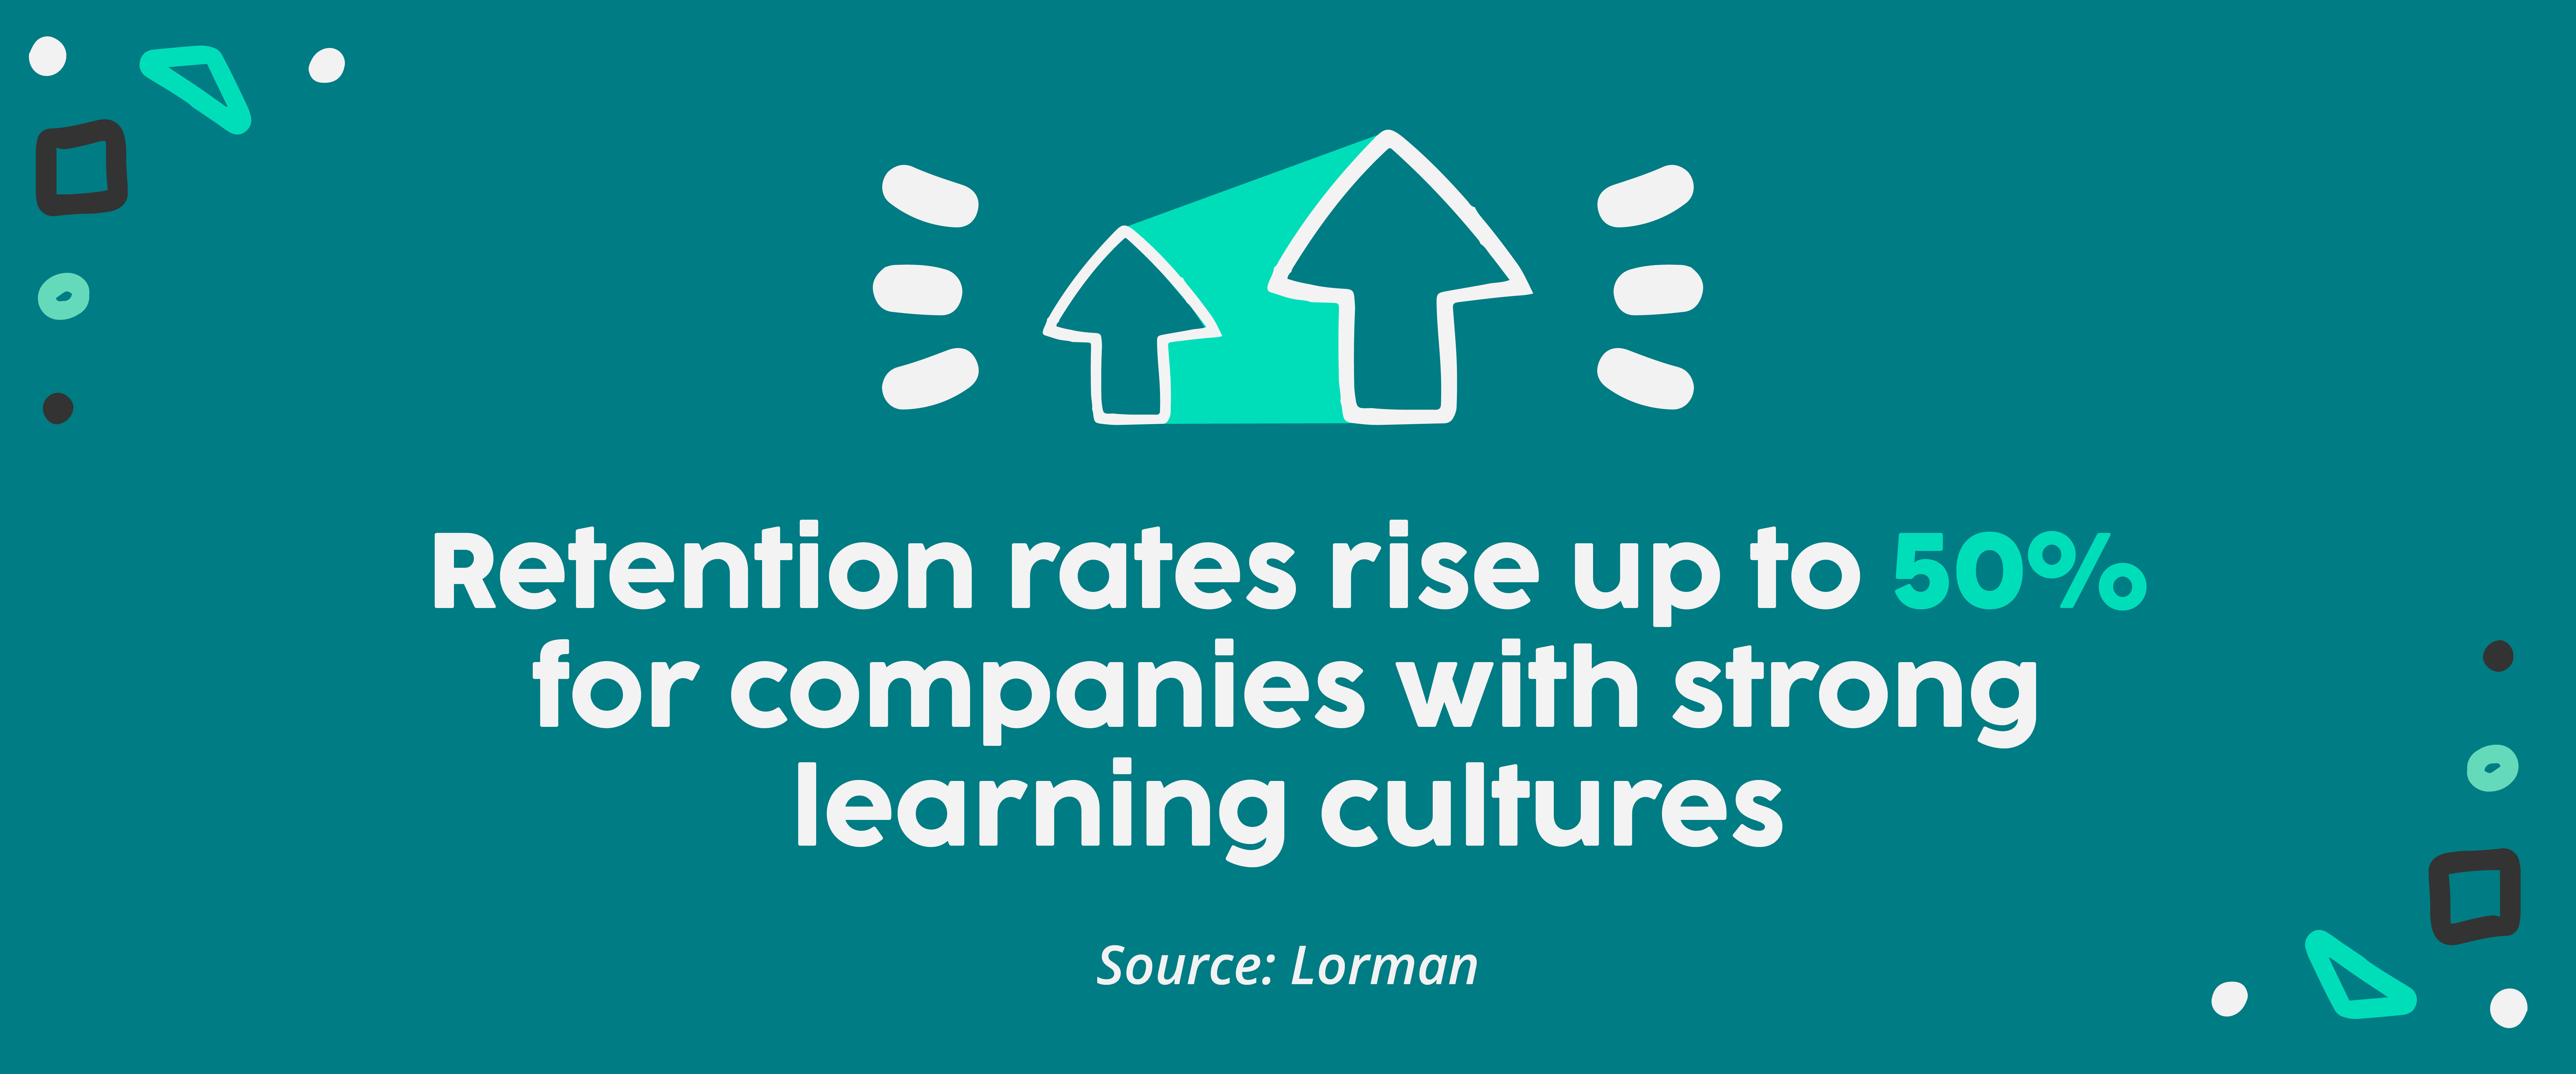 retention rated rise by u to 50% in companies with a strong learning culture